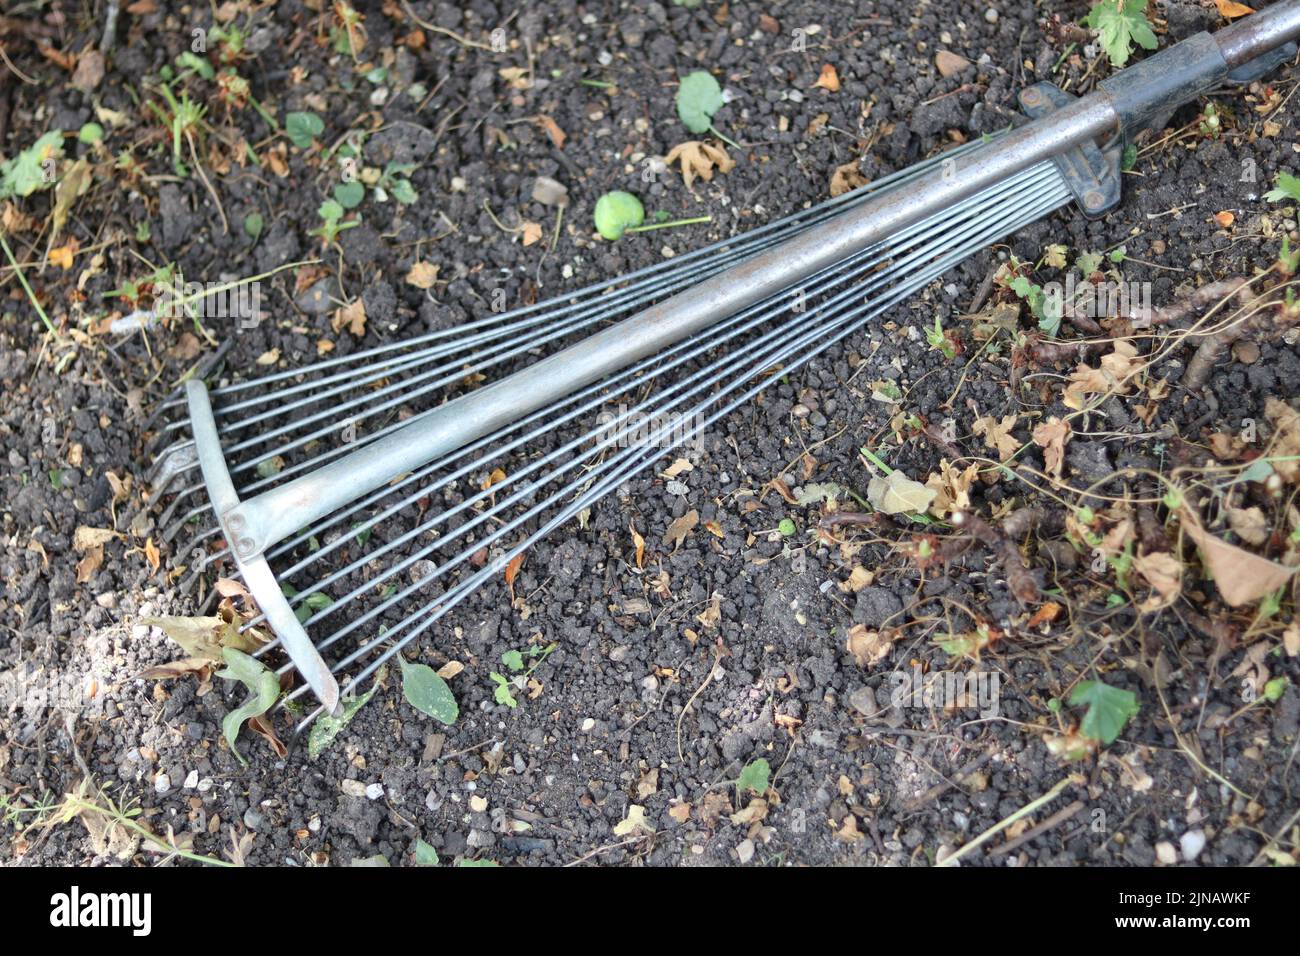 Silver metal garden rake with fine tines lying on the ground  Stock Photo